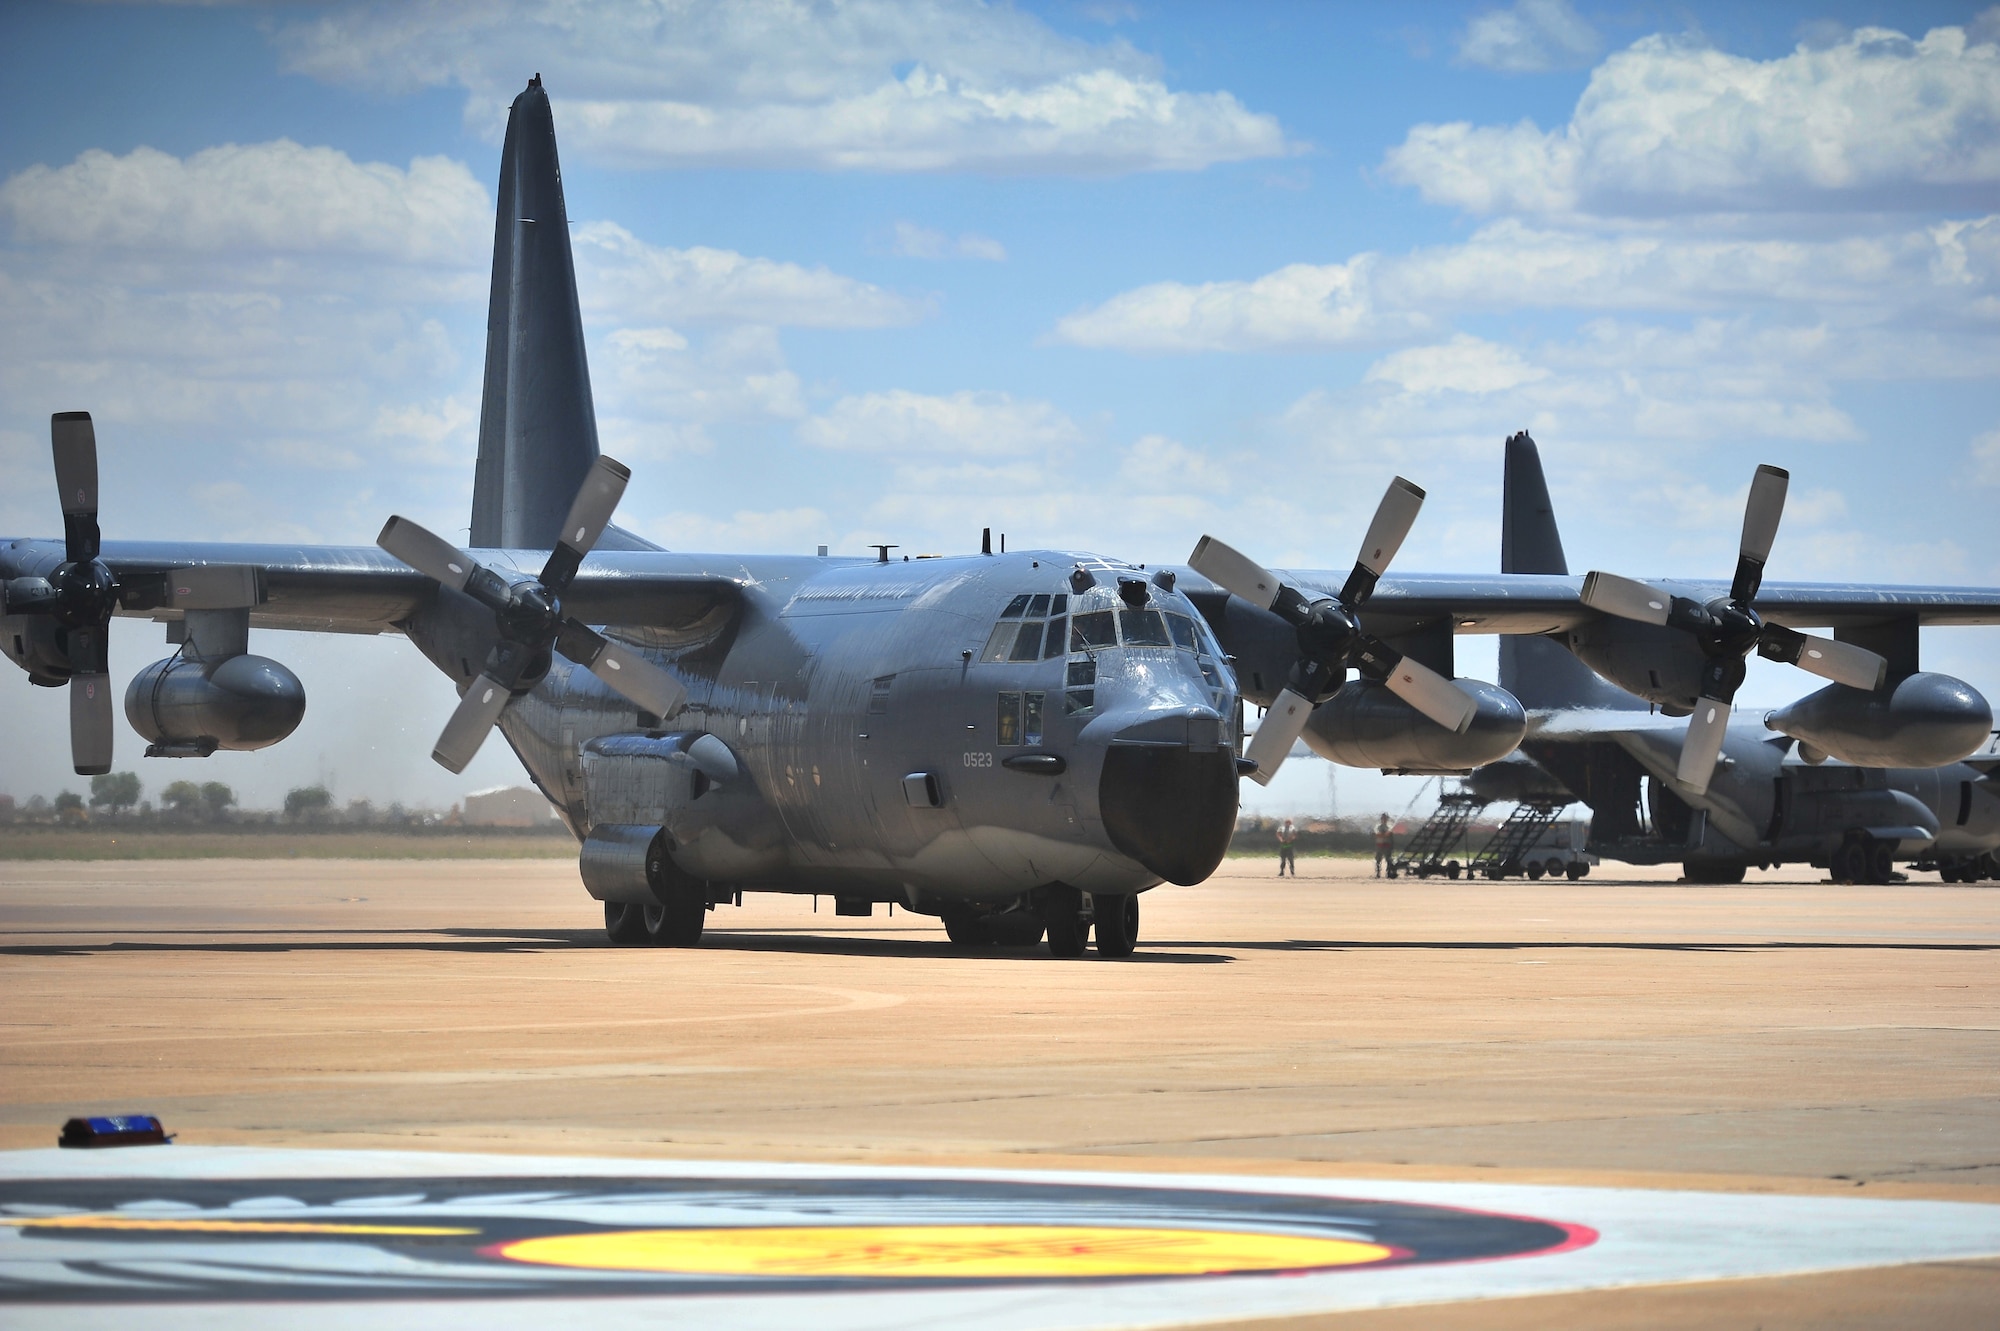 An MC-130E Combat Talon I taxies onto the flightline during an aircraft retirement ceremony at Cannon Air Force Base, N.M., June 22, 2012. This particular Talon I was the lead aircraft that performed a Prisoner of War extraction in North Vietnam called the Son Tay Raid in 1970. (U.S. Air Force photo by Airman 1st Class Alexxis Pons Abascal)  